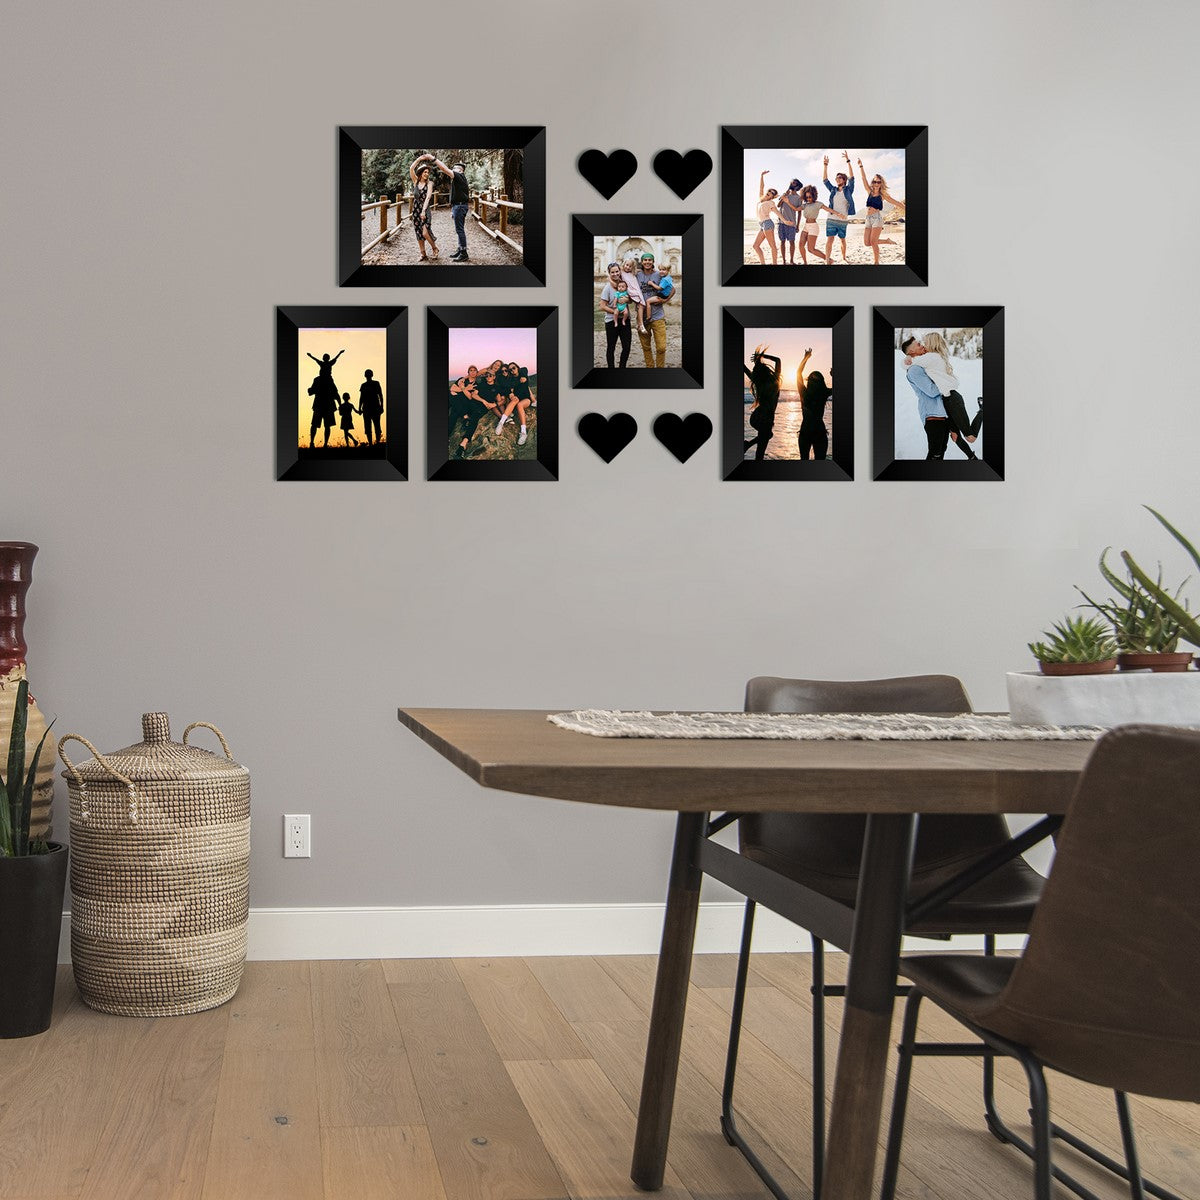 Memory Wall Collage Photo Frame - Set of 7 Photo Frames for 5 Photos of 4"x6", 2 Photos of 5"x7", 4 Pieces of HEARTS 2